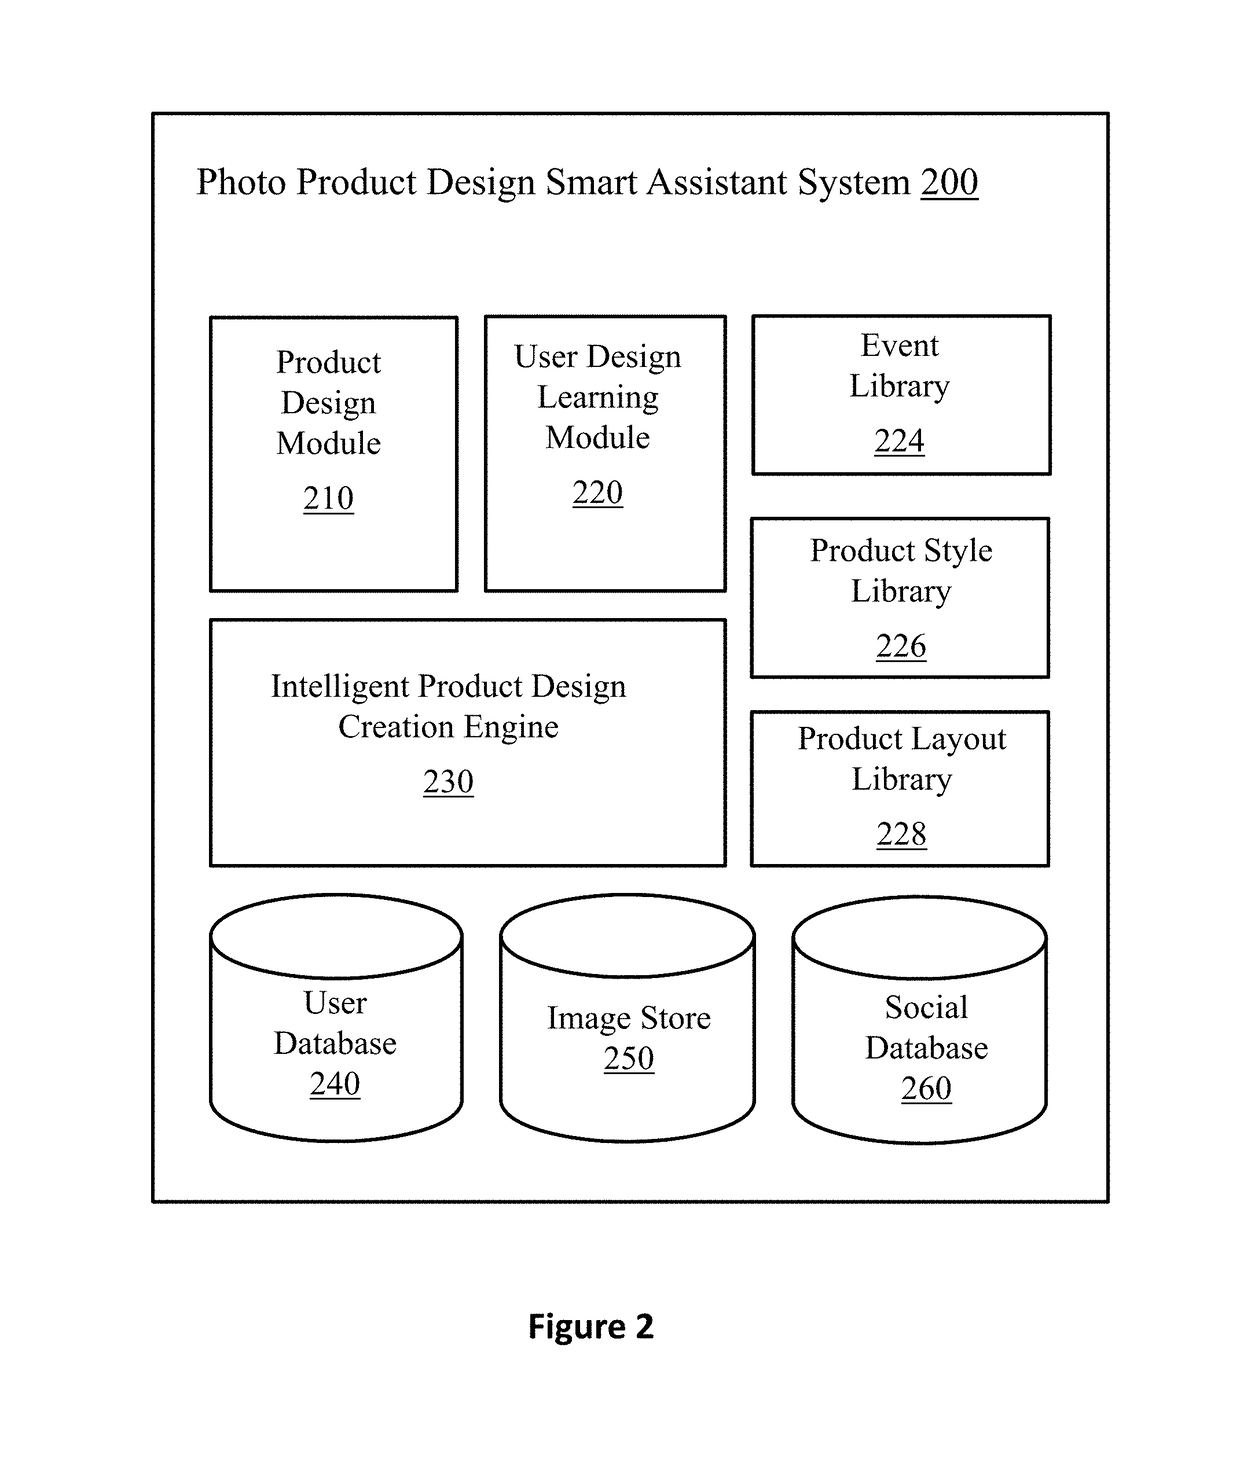 System and method for automatically generating a new portion of a photo product design based on user input portion